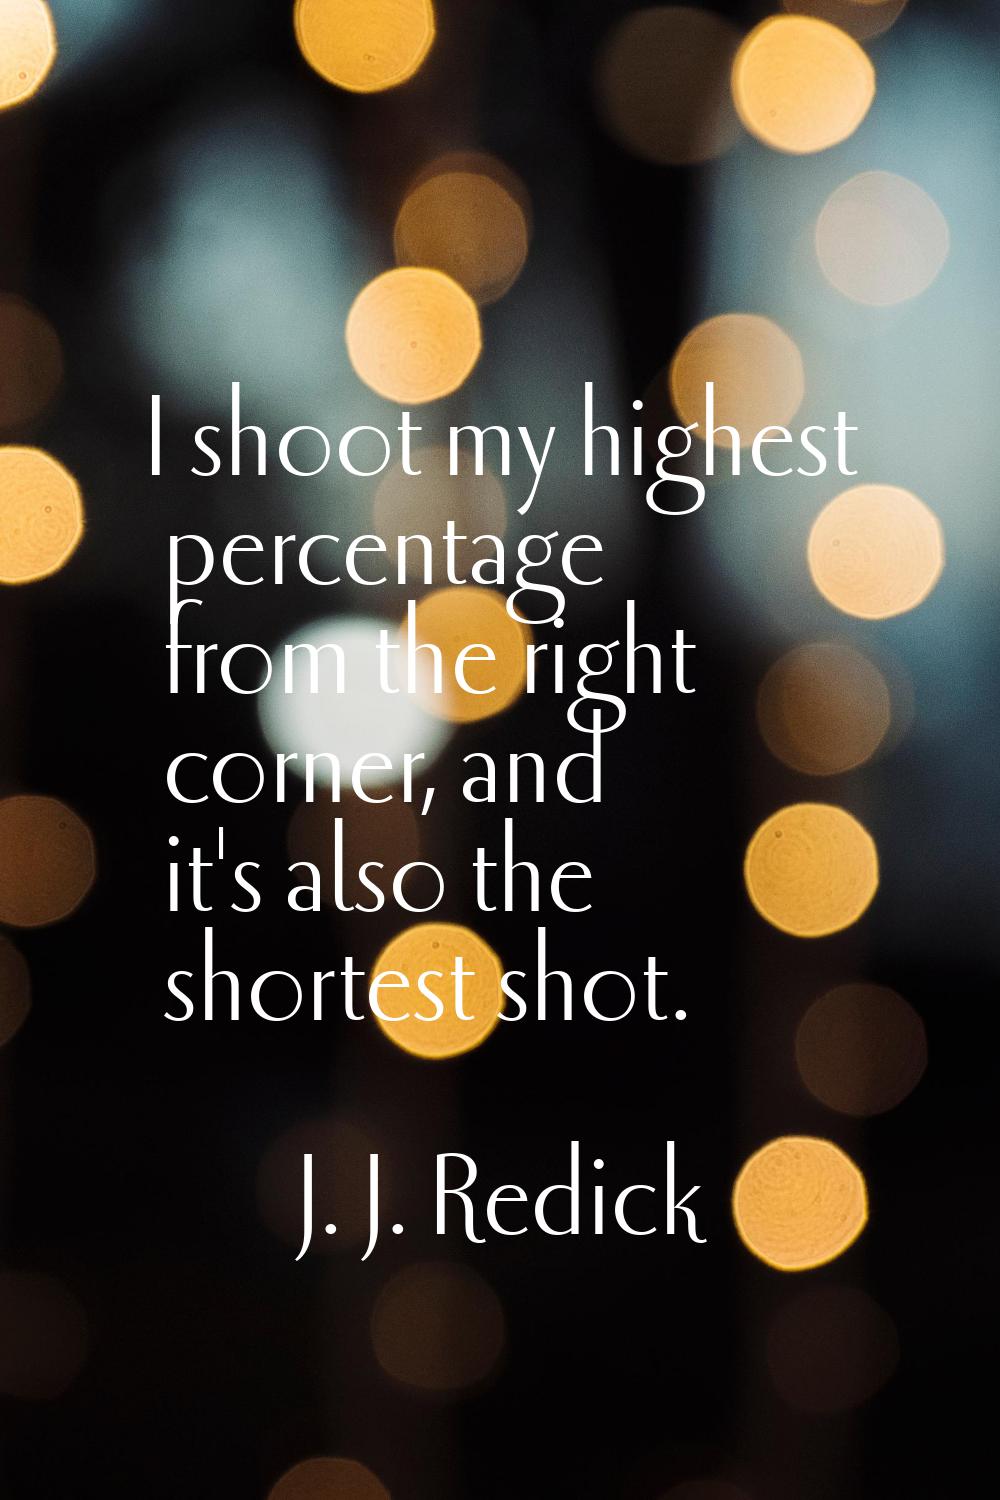 I shoot my highest percentage from the right corner, and it's also the shortest shot.